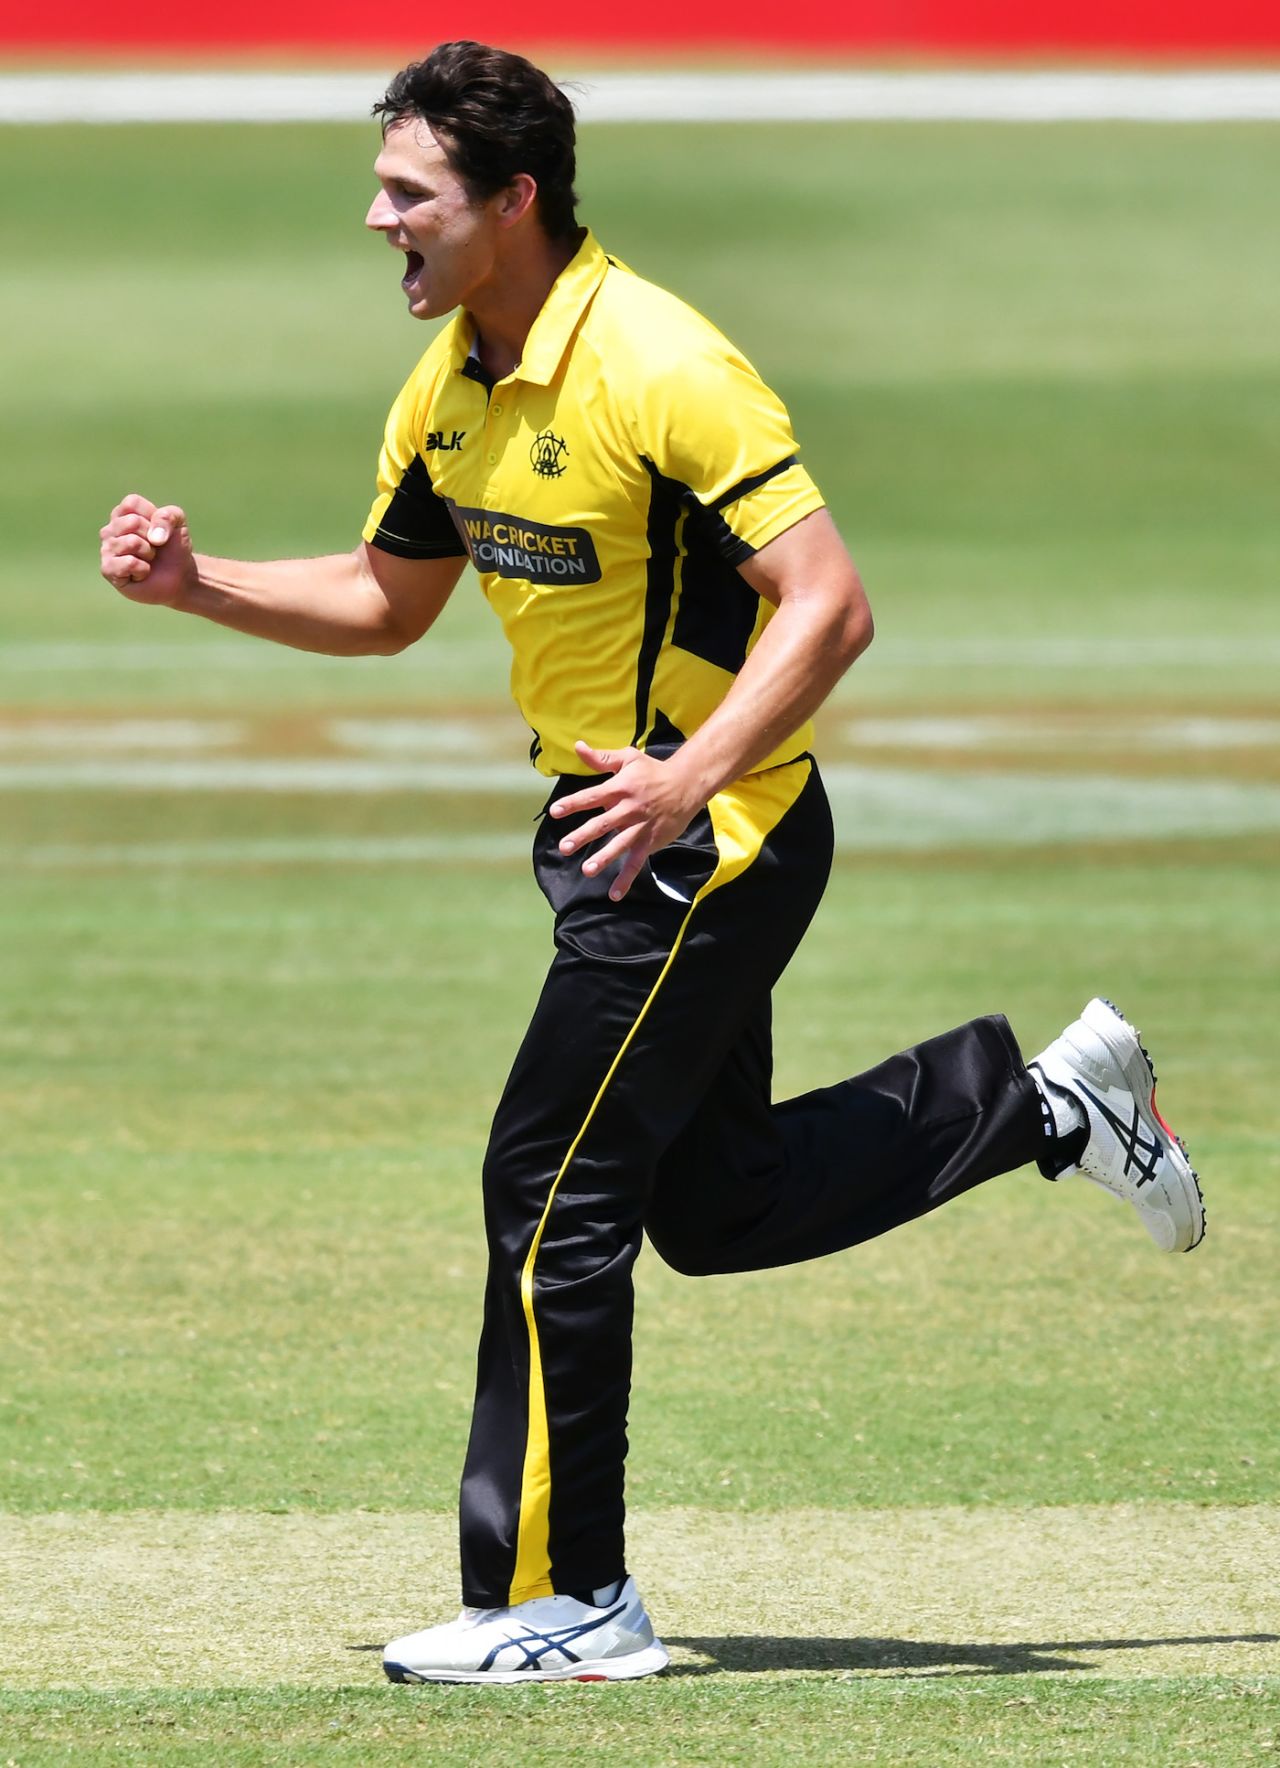 Nathan Coulter-Nile celebrates a wicket, South Australia v Western Australia, Marsh Cup, Adelaide, November 17, 2019